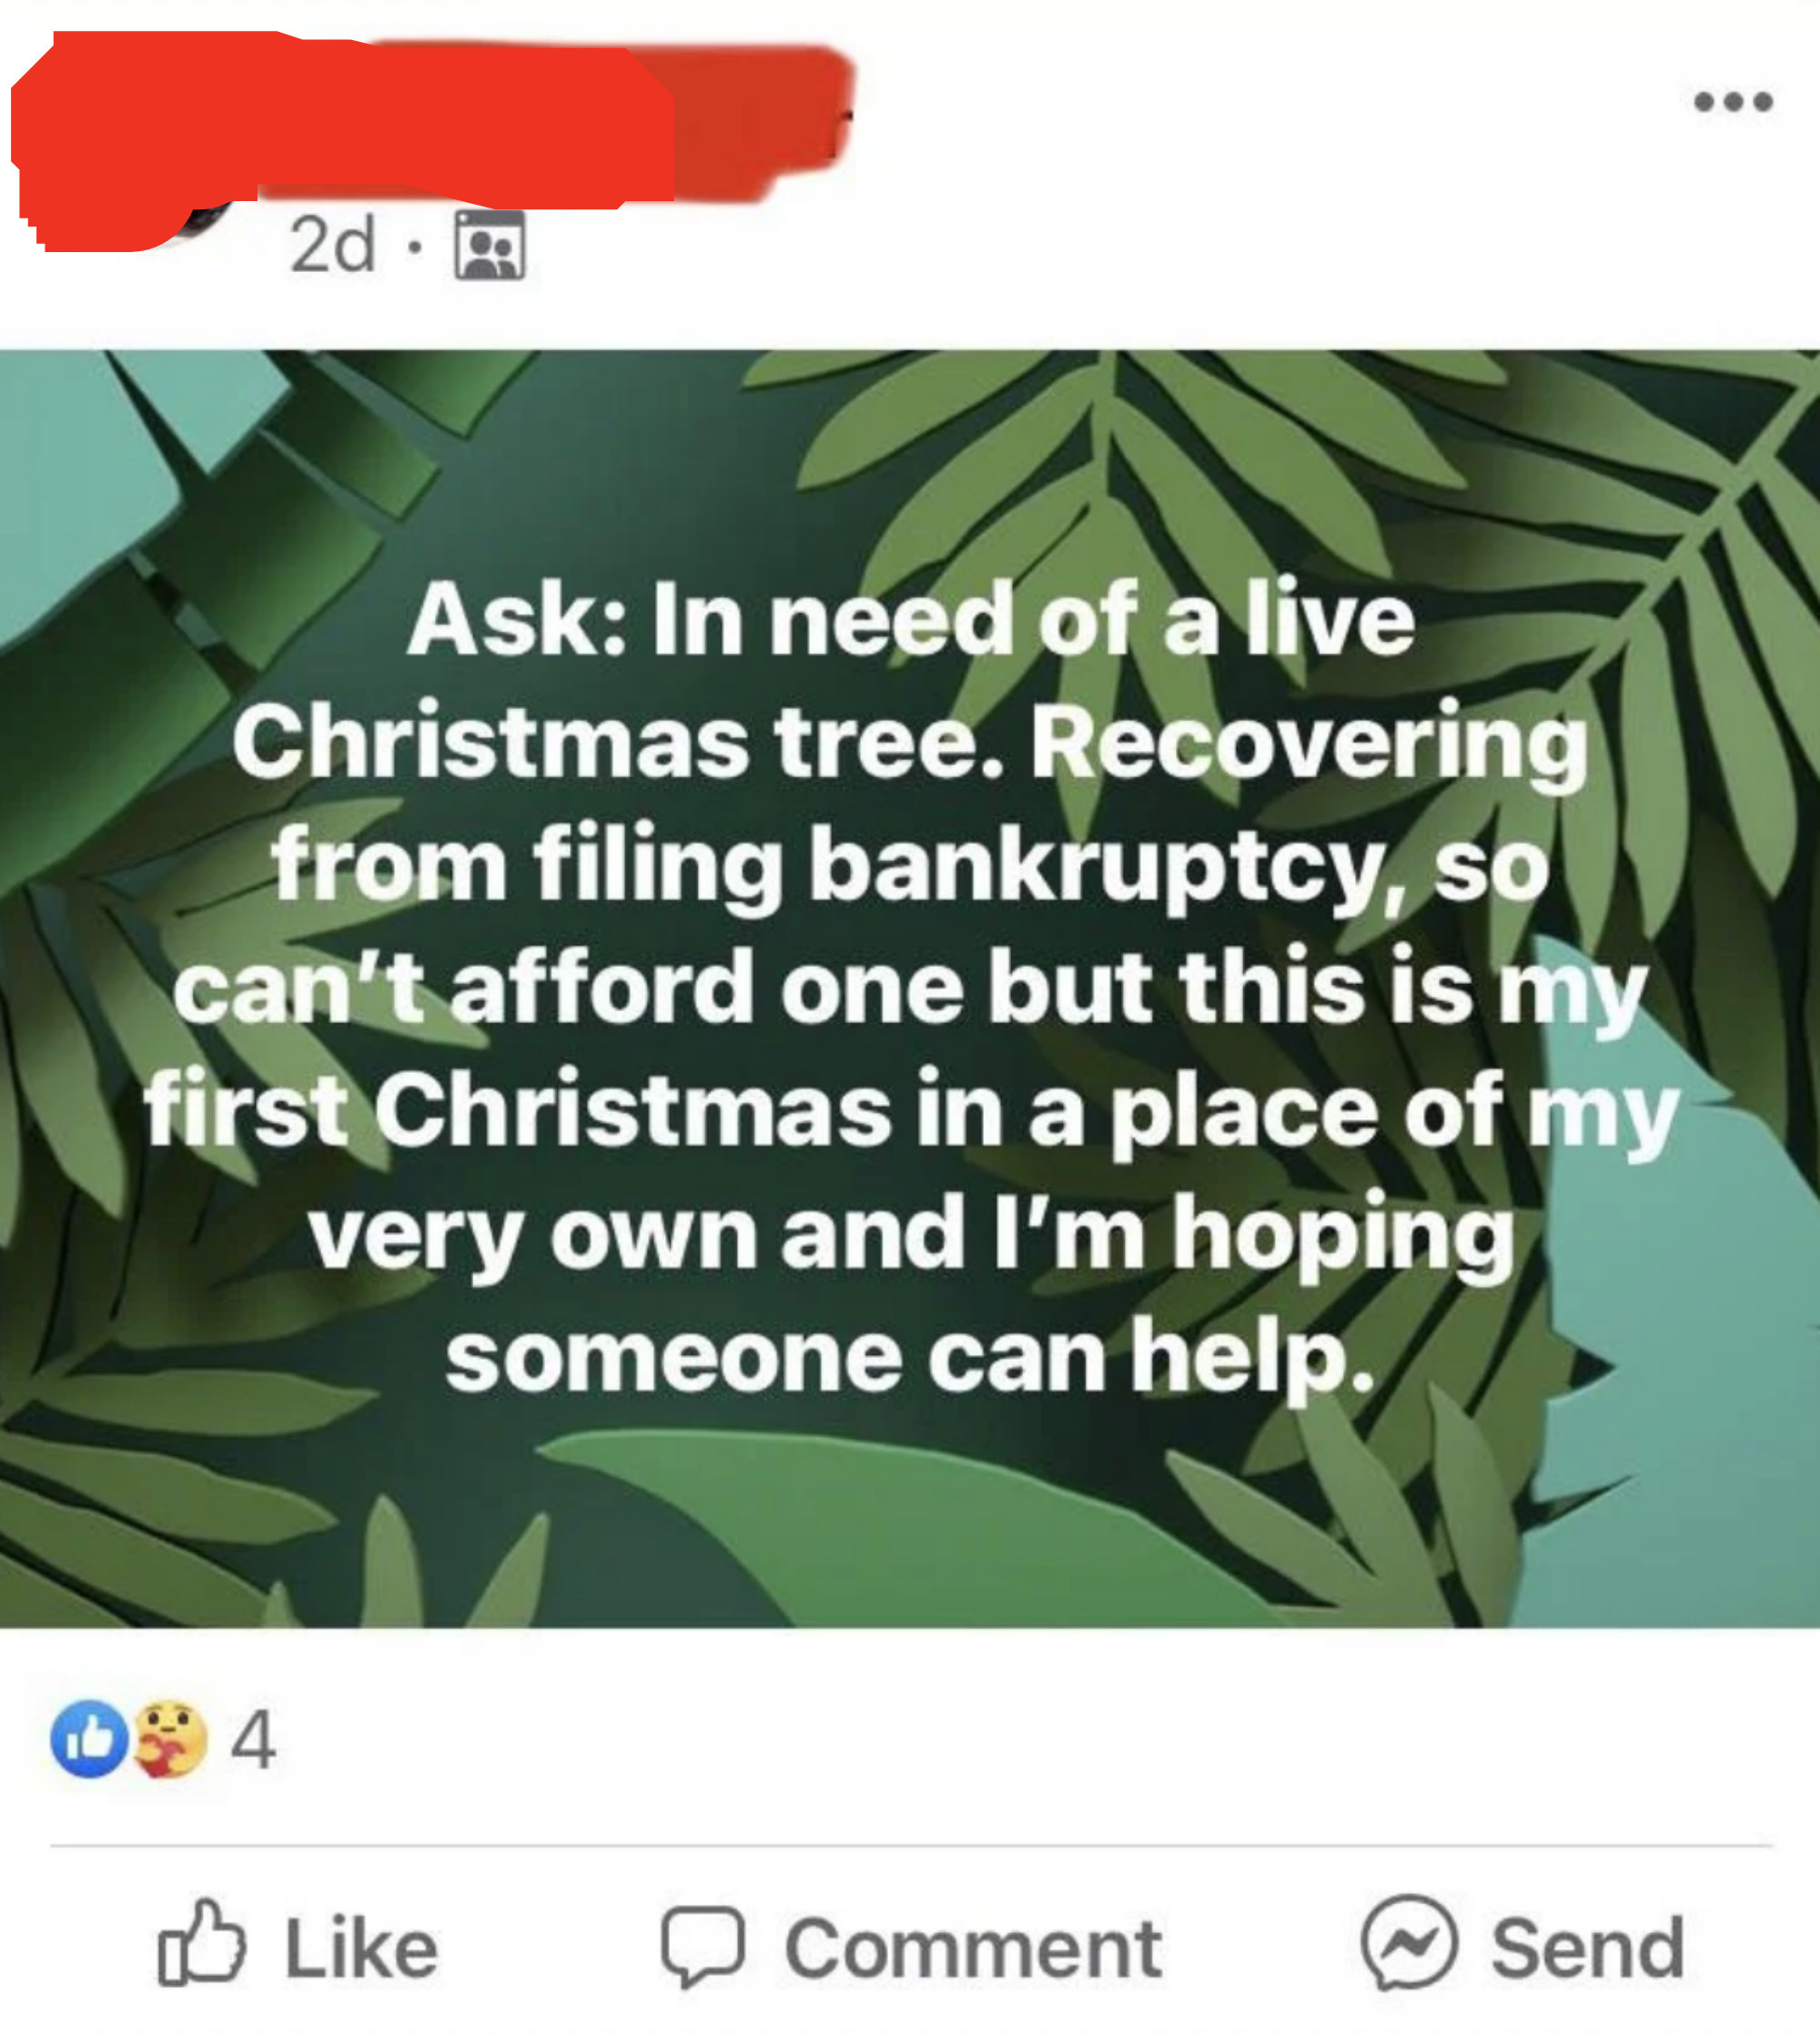 A Facebook post asking for a live Xmas tree; they&#x27;re recovering from bankruptcy so they can&#x27;t afford one, but this is their first Xmas in a place of their own